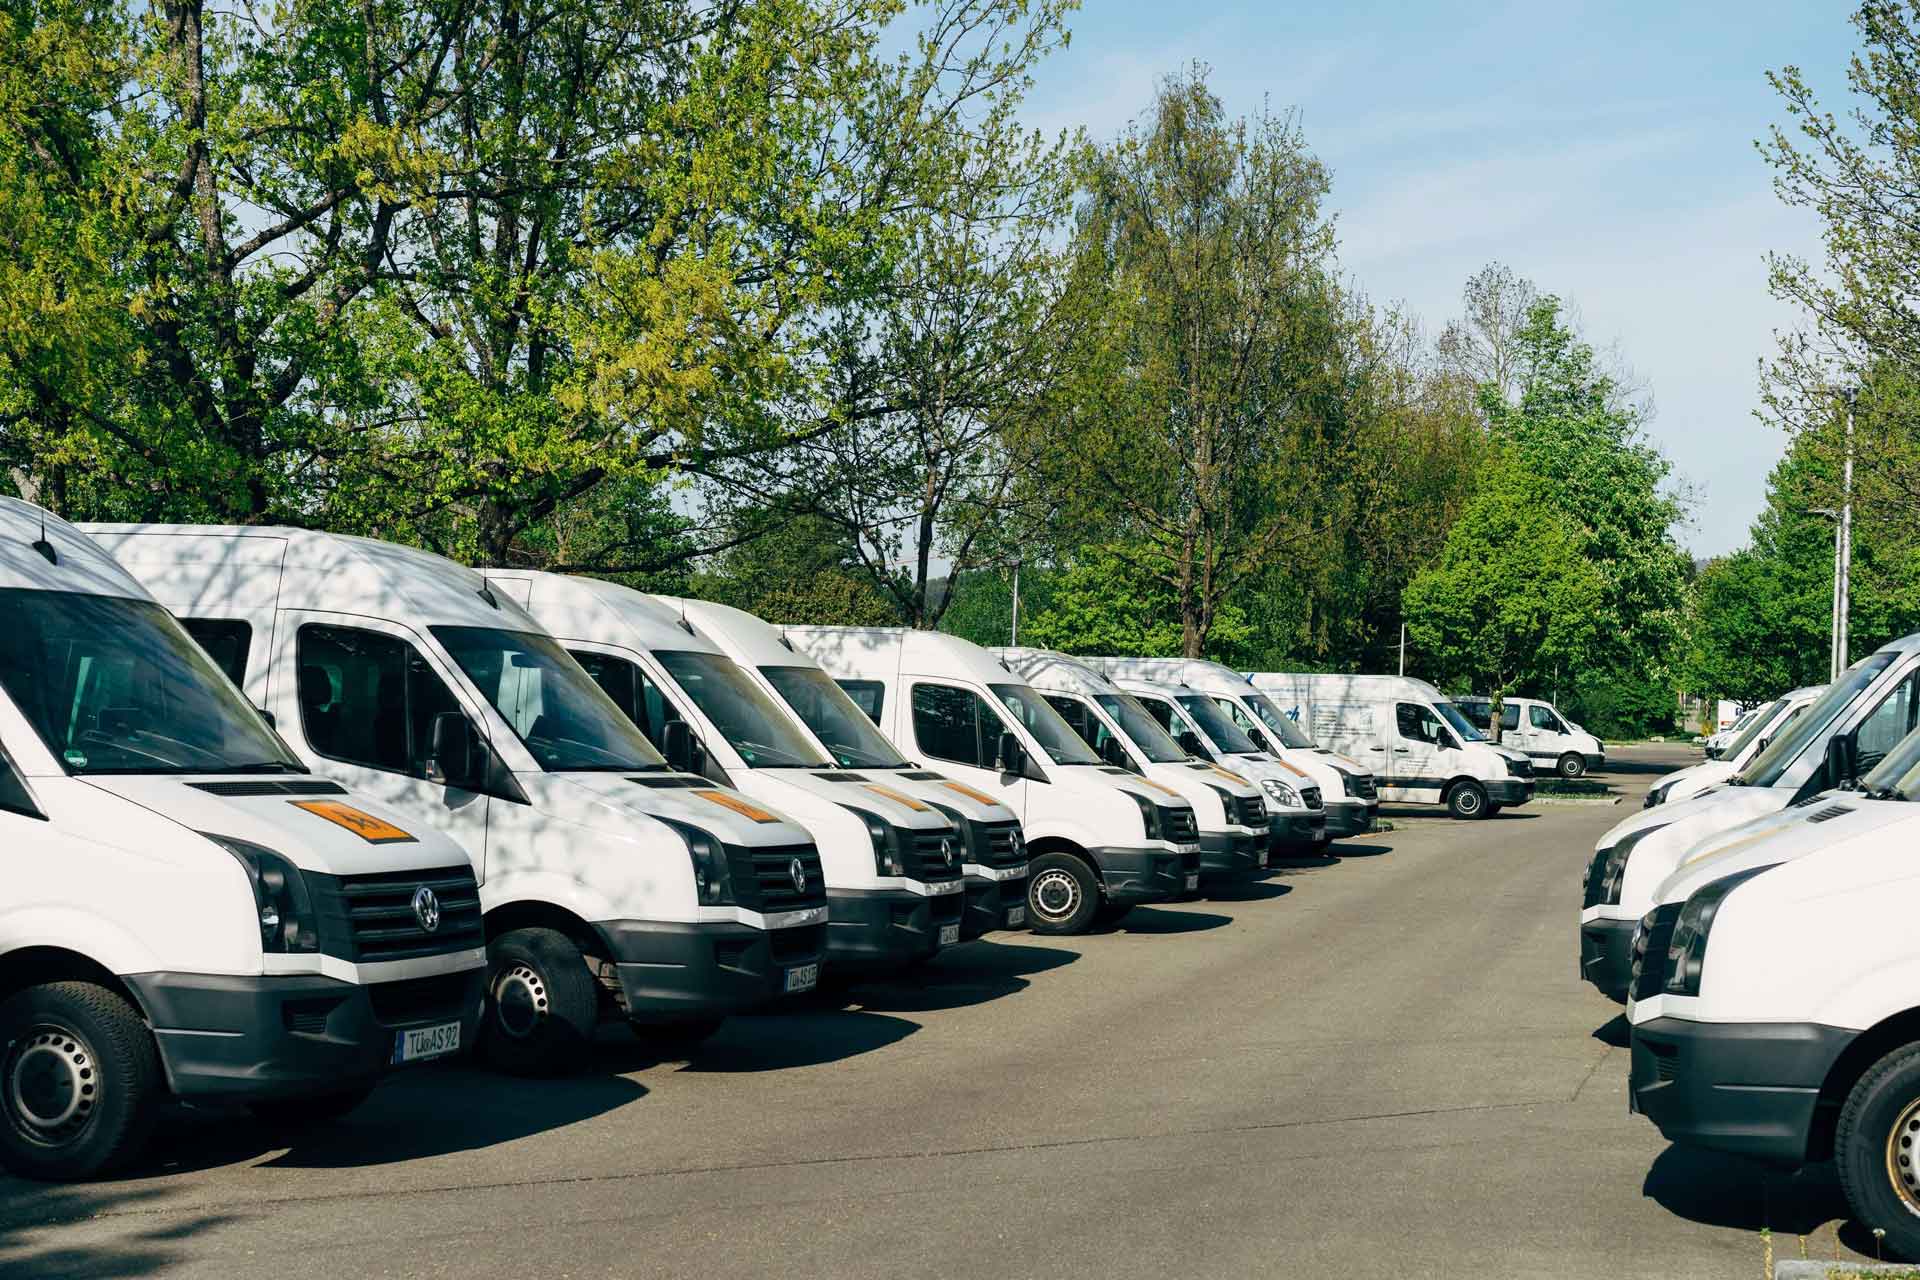 Do You Require a Van Hire Service in Wicklow?